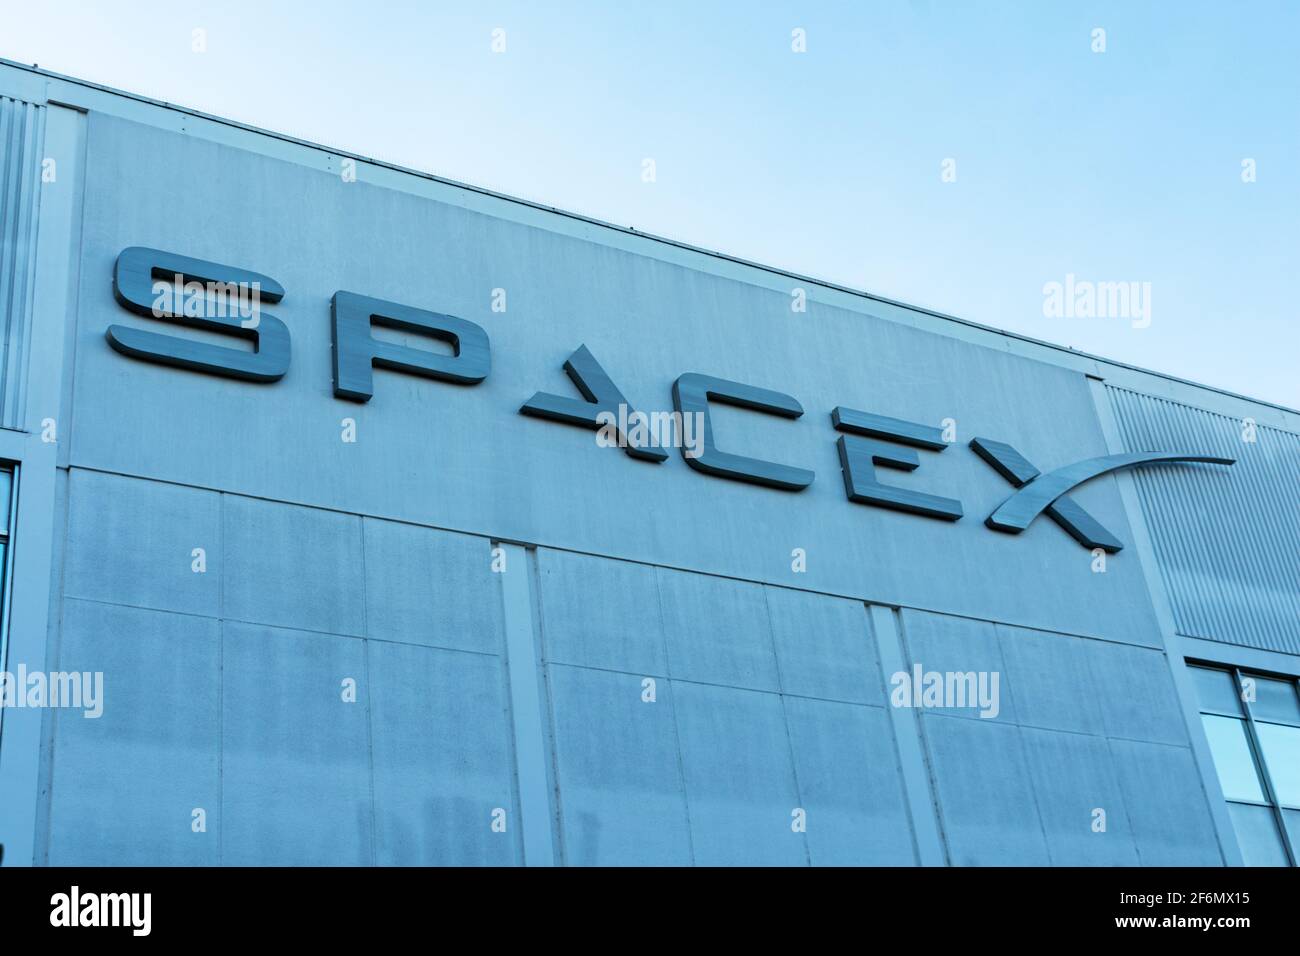 SpaceX sign logo on Space Exploration Technologies Corp headquarters building. SpaceX is private American aerospace manufacturer - Hawthorne, Californ Stock Photo